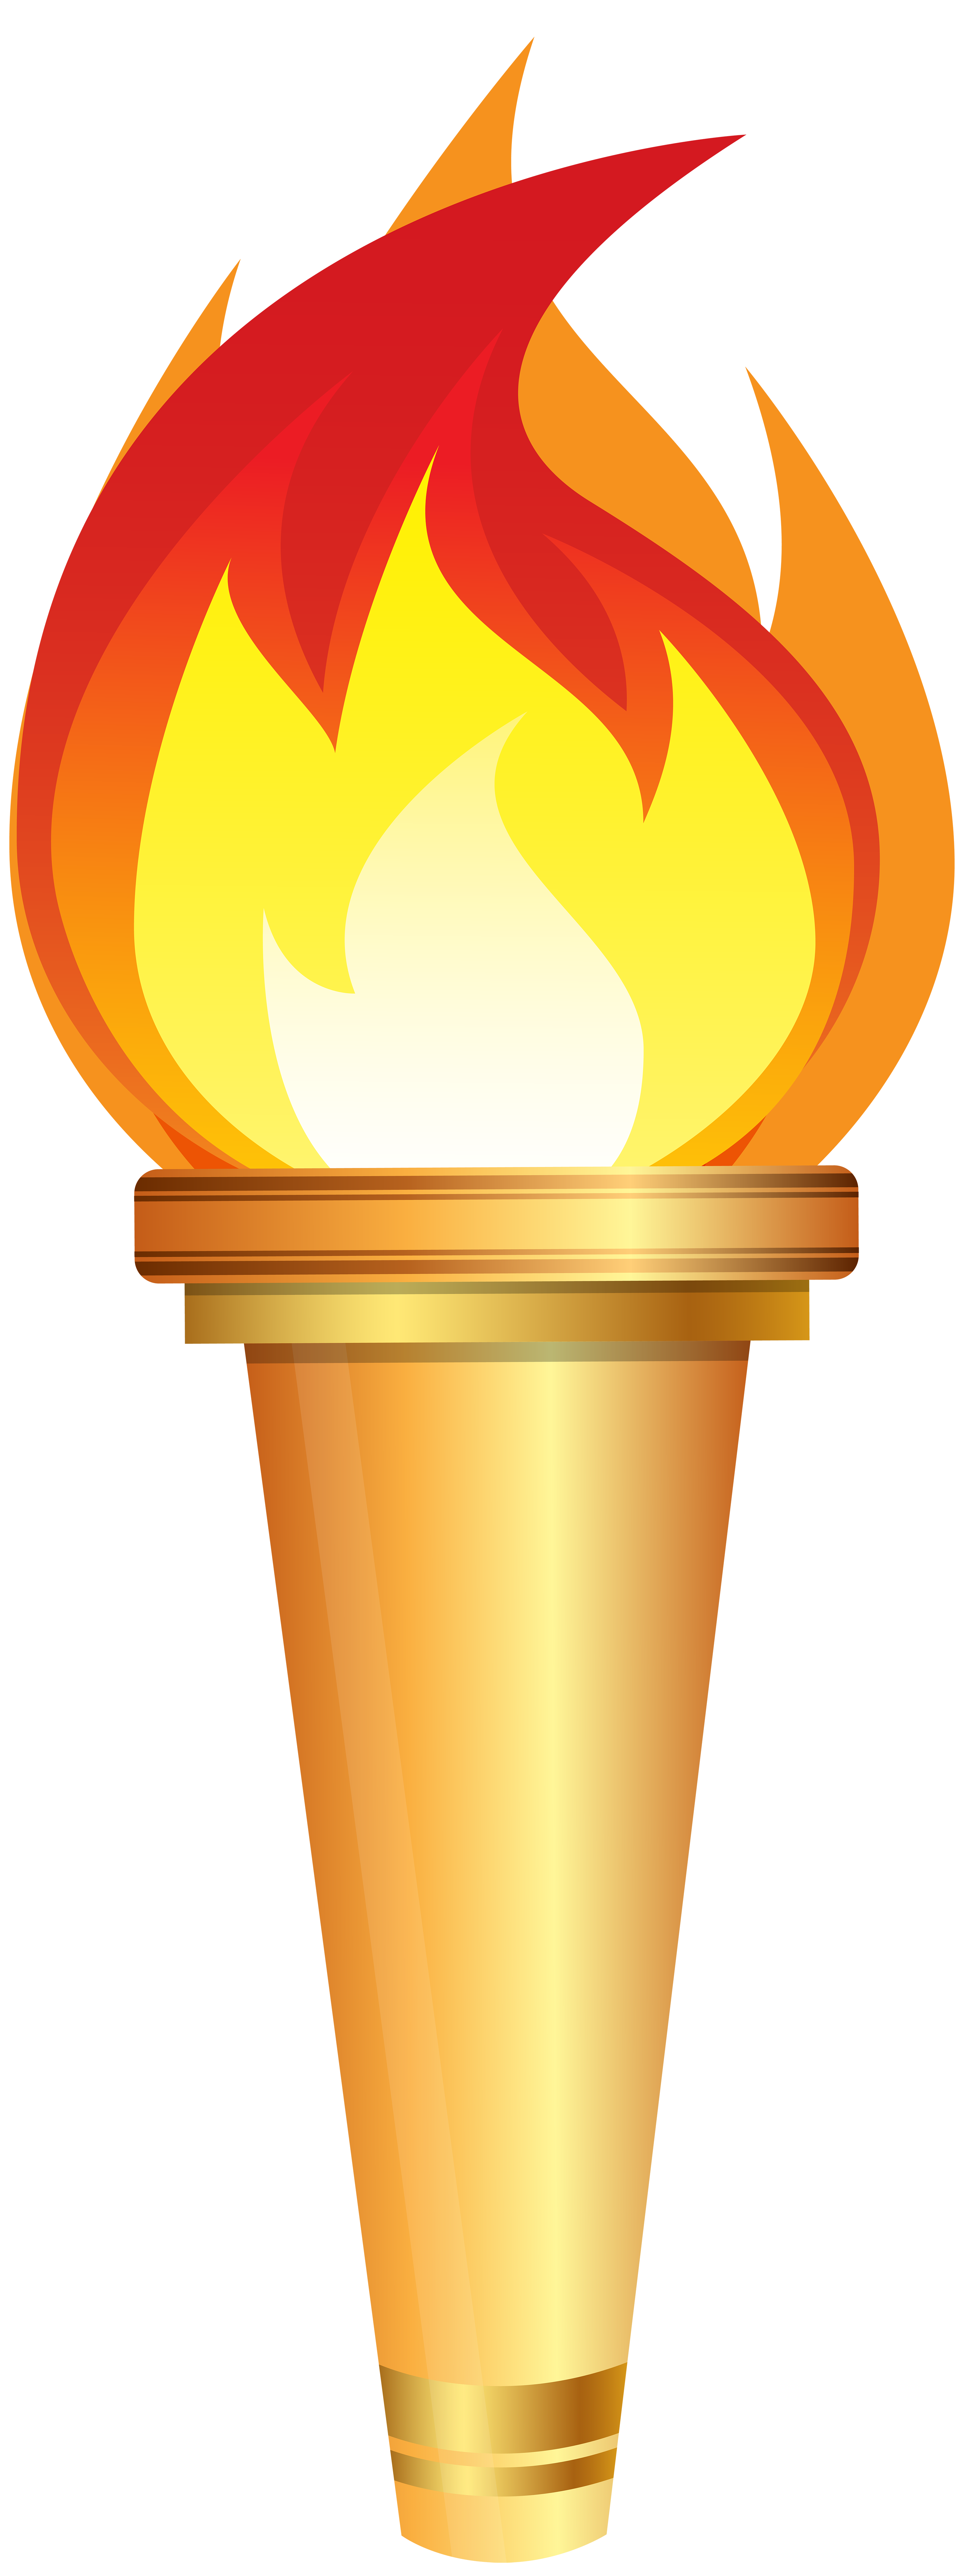 Clipart fire sword. Olympic torch png clip